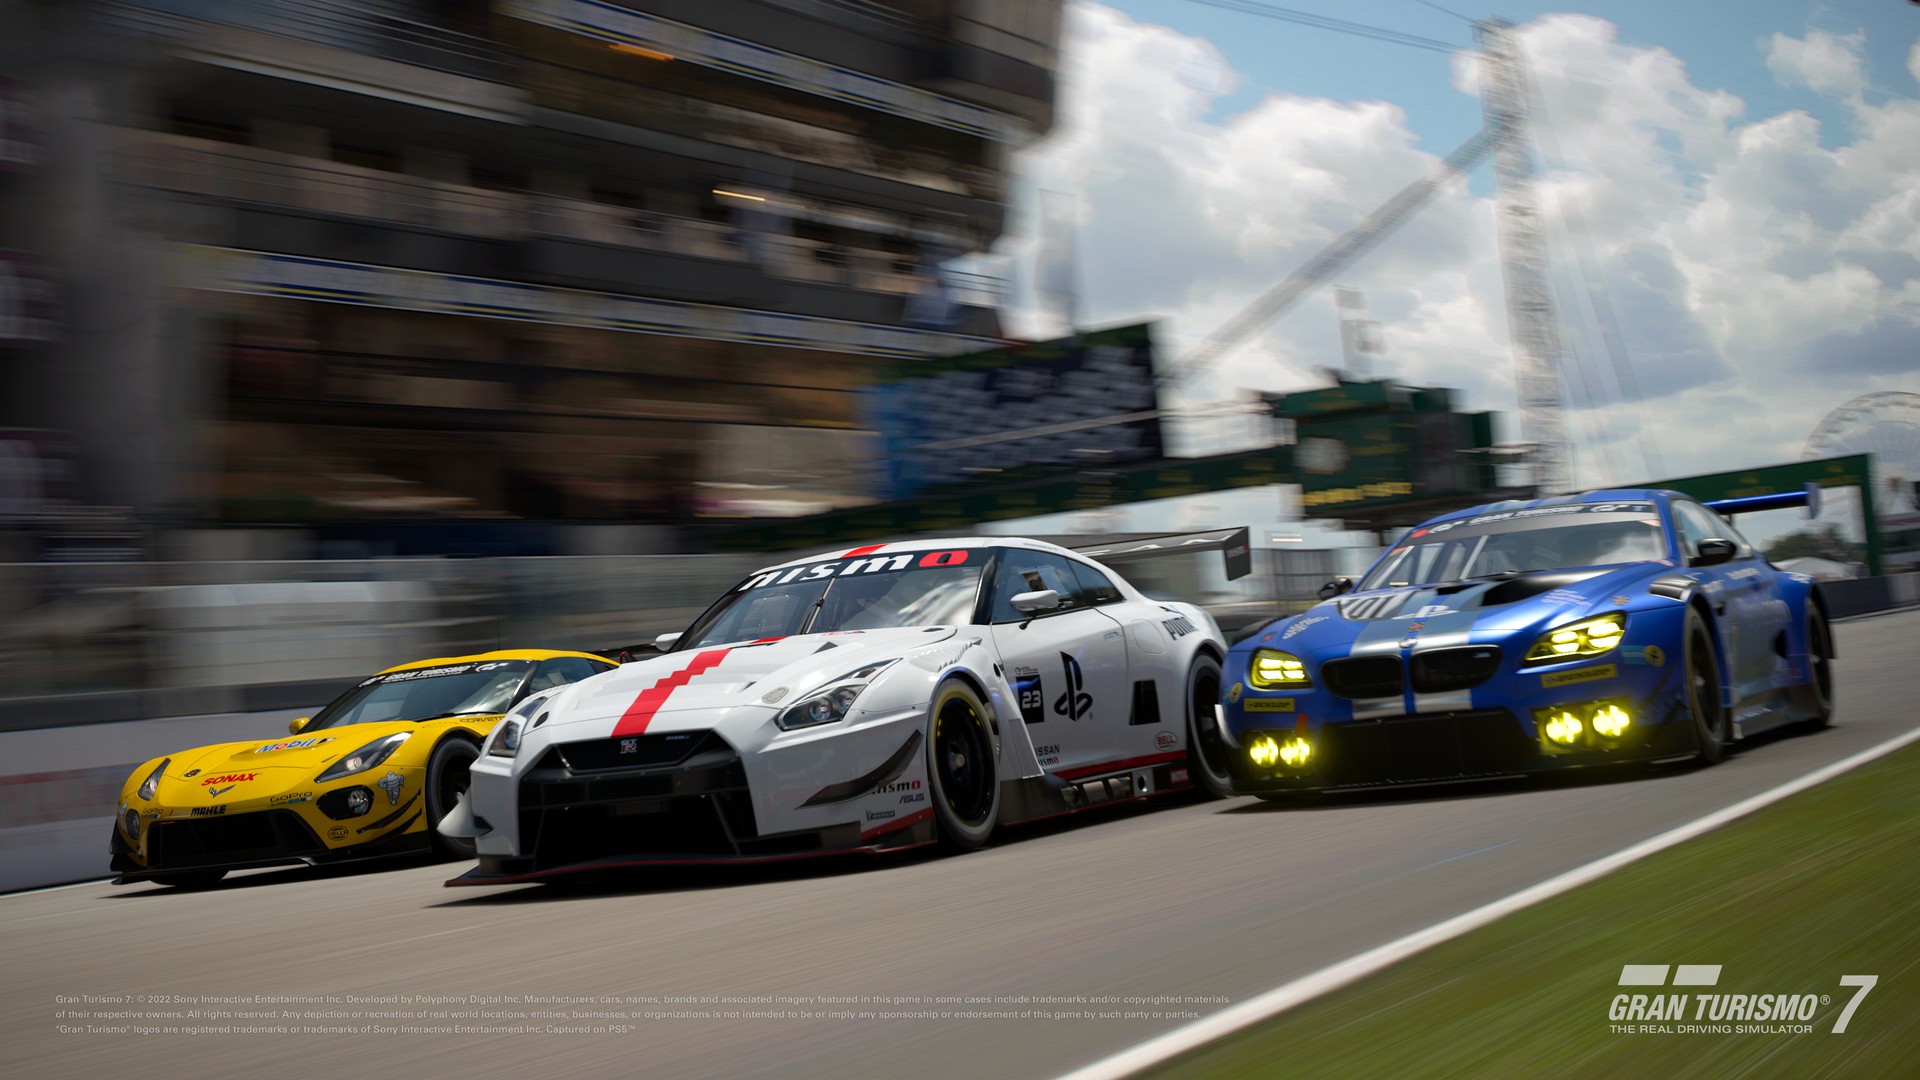 The Gran Turismo 7 August Update: Four New Cars, Including One You